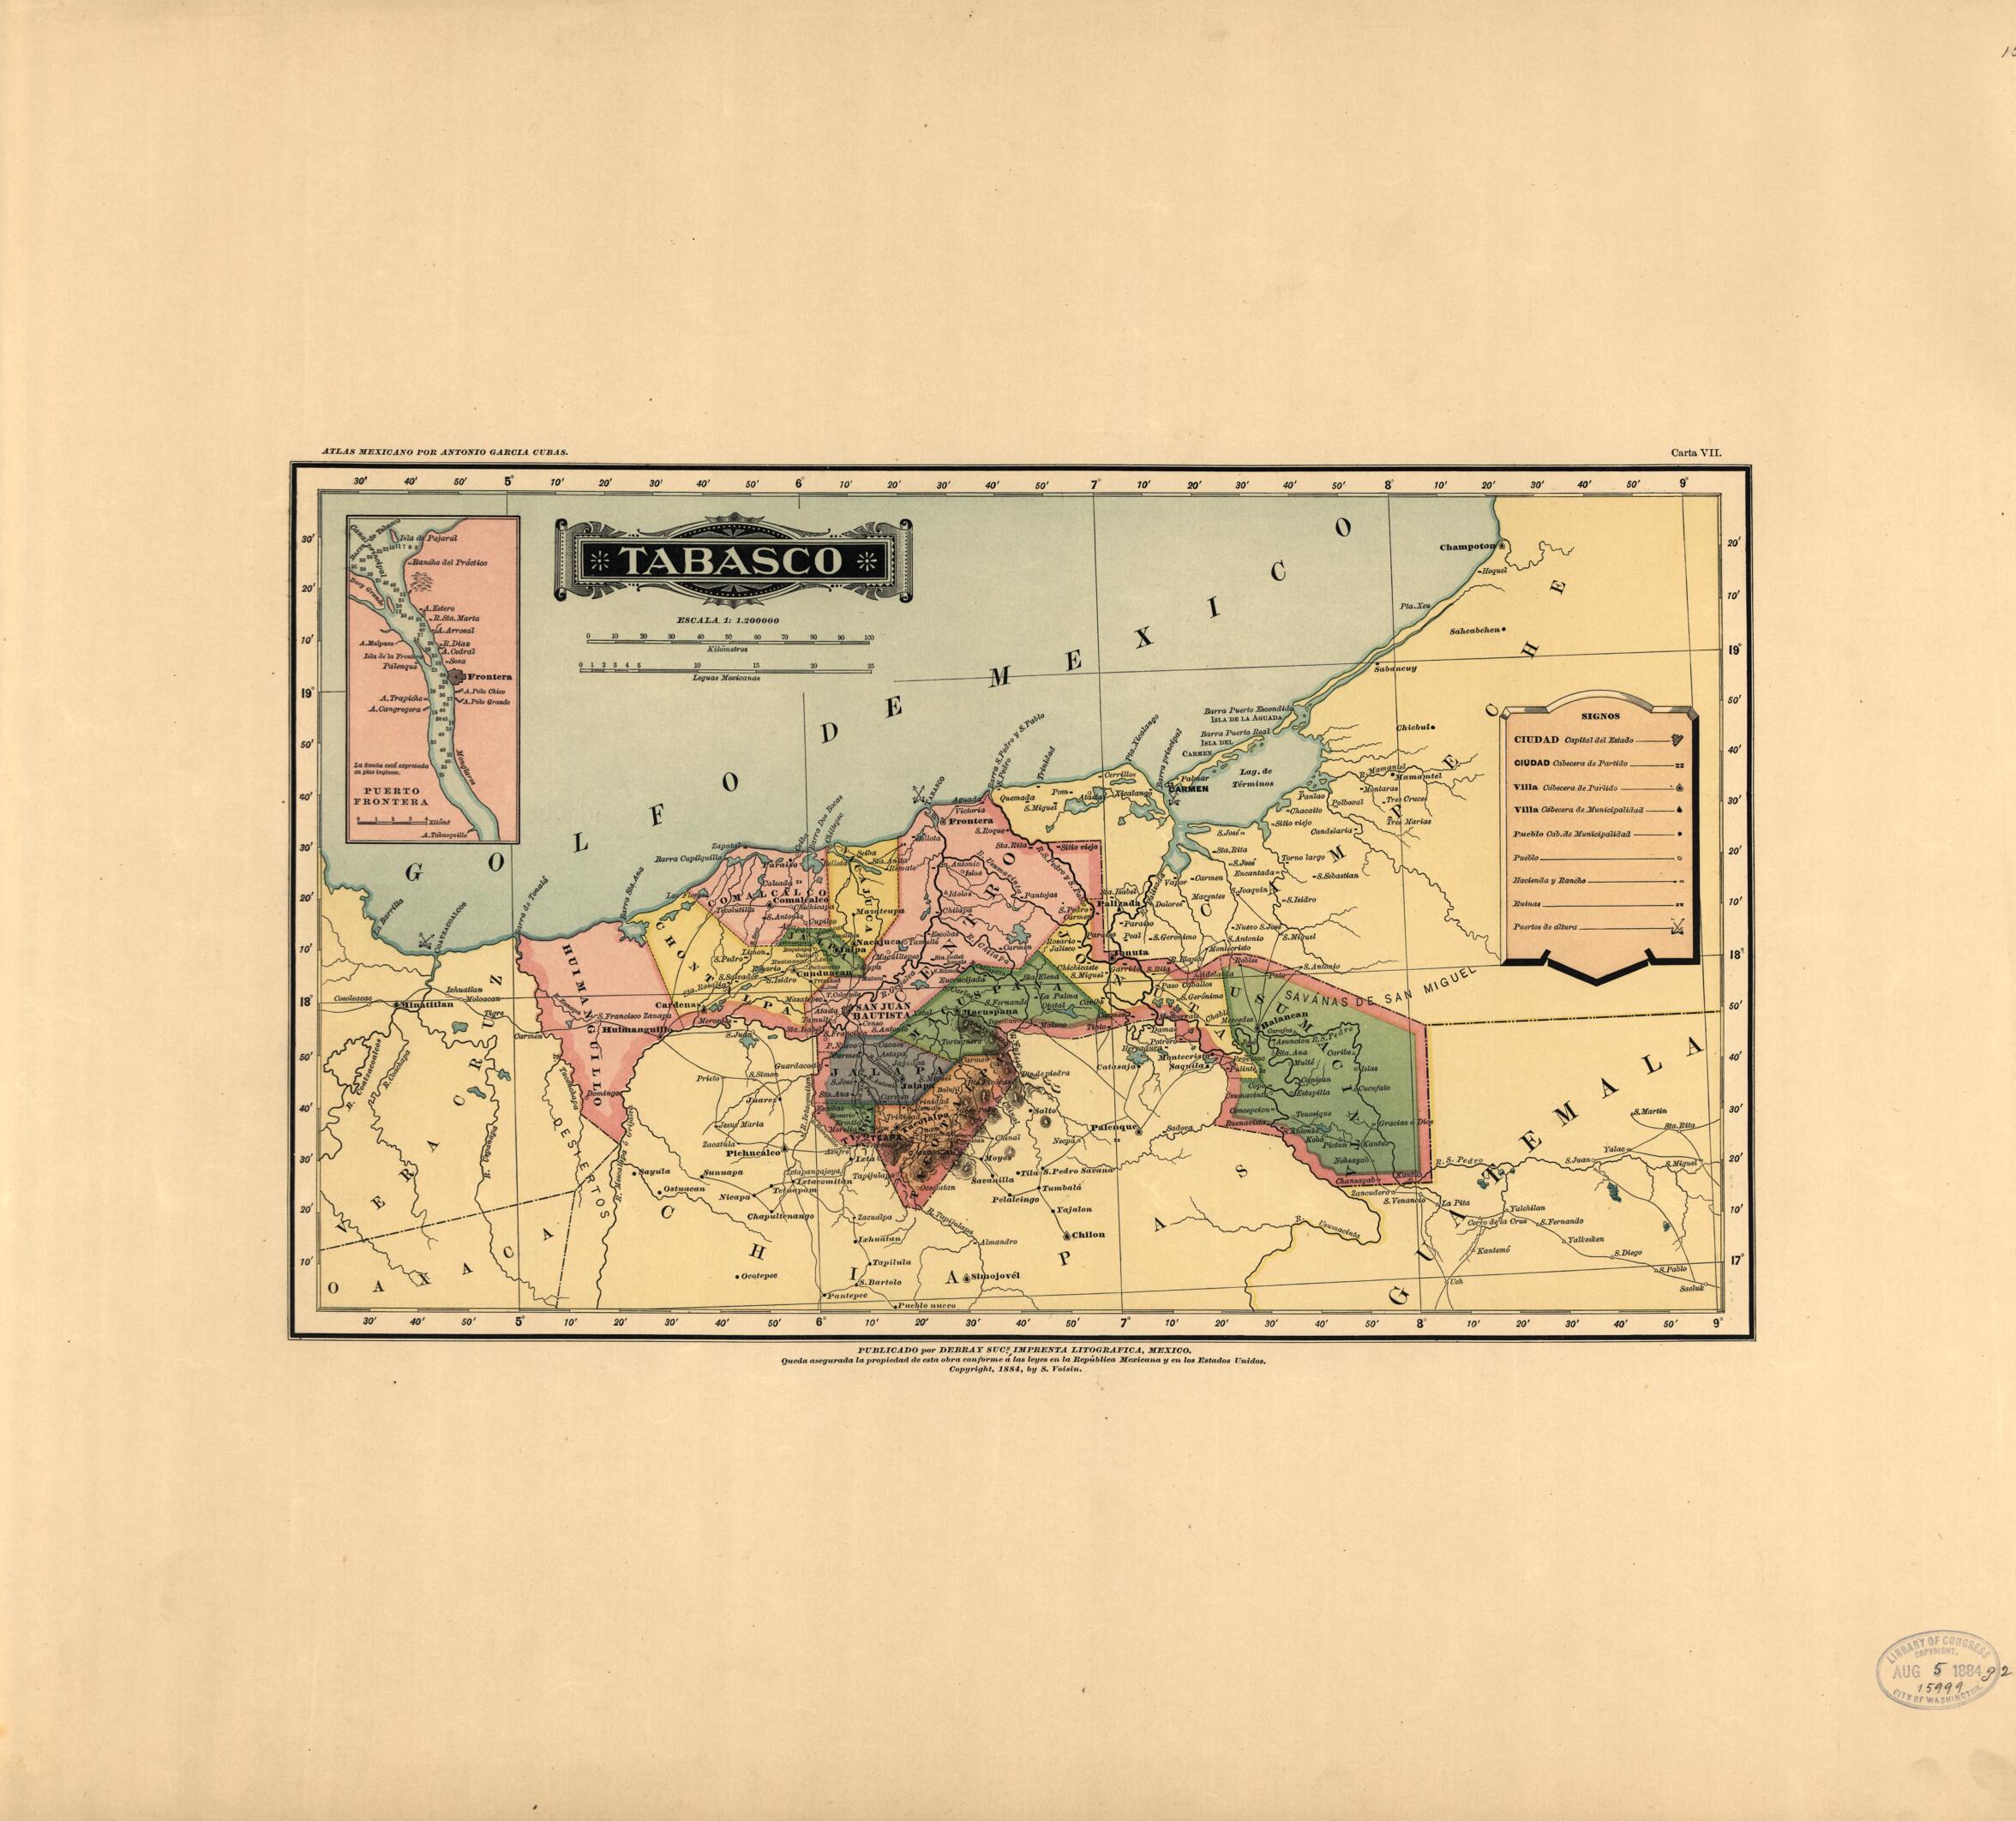 This old map of Tabasco from Atlas Mexicano. from 1884 was created by Antonio García Cubas in 1884